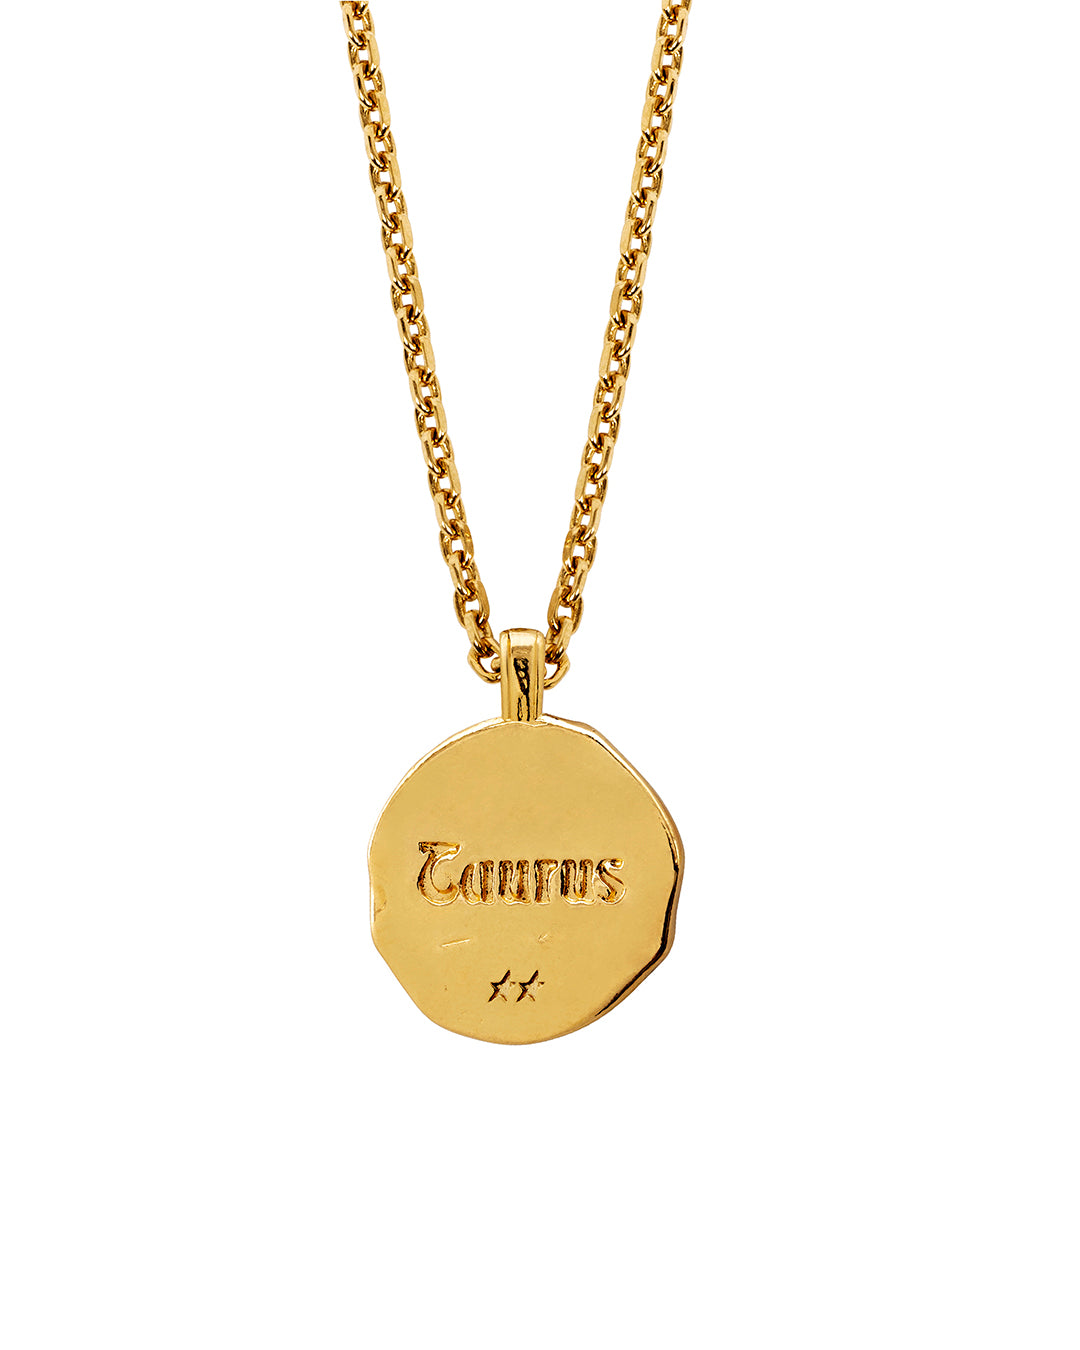 Taurus Zodiac Necklace in 9ct Gold | Gold Boutique